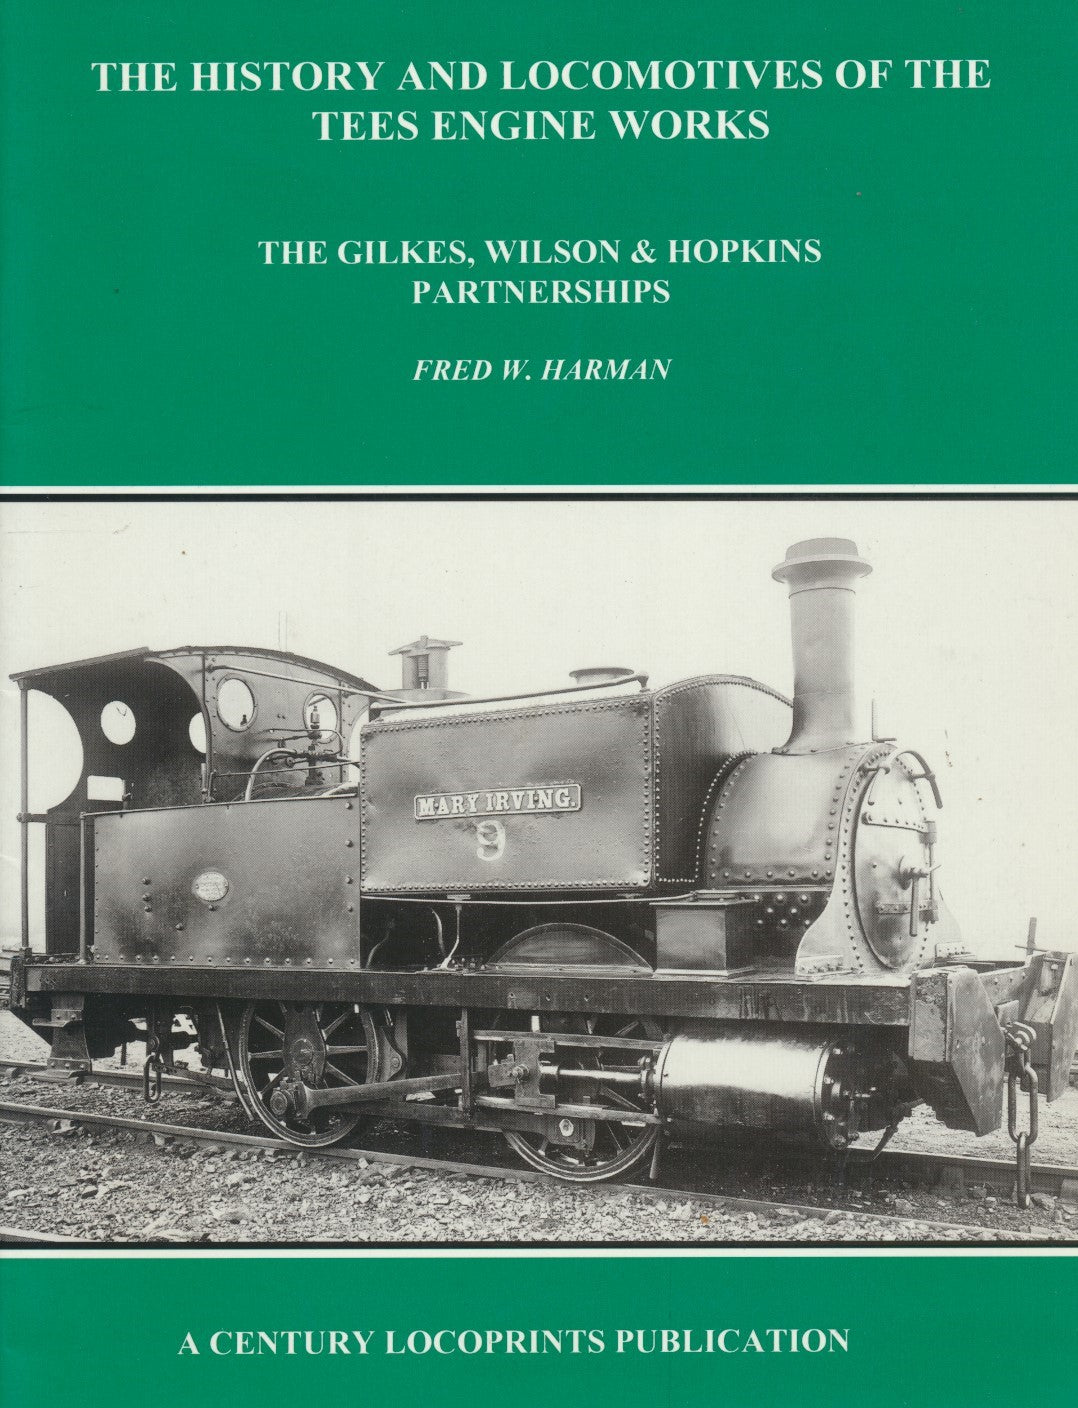 The History and Locomotives of the Tees Engine Works